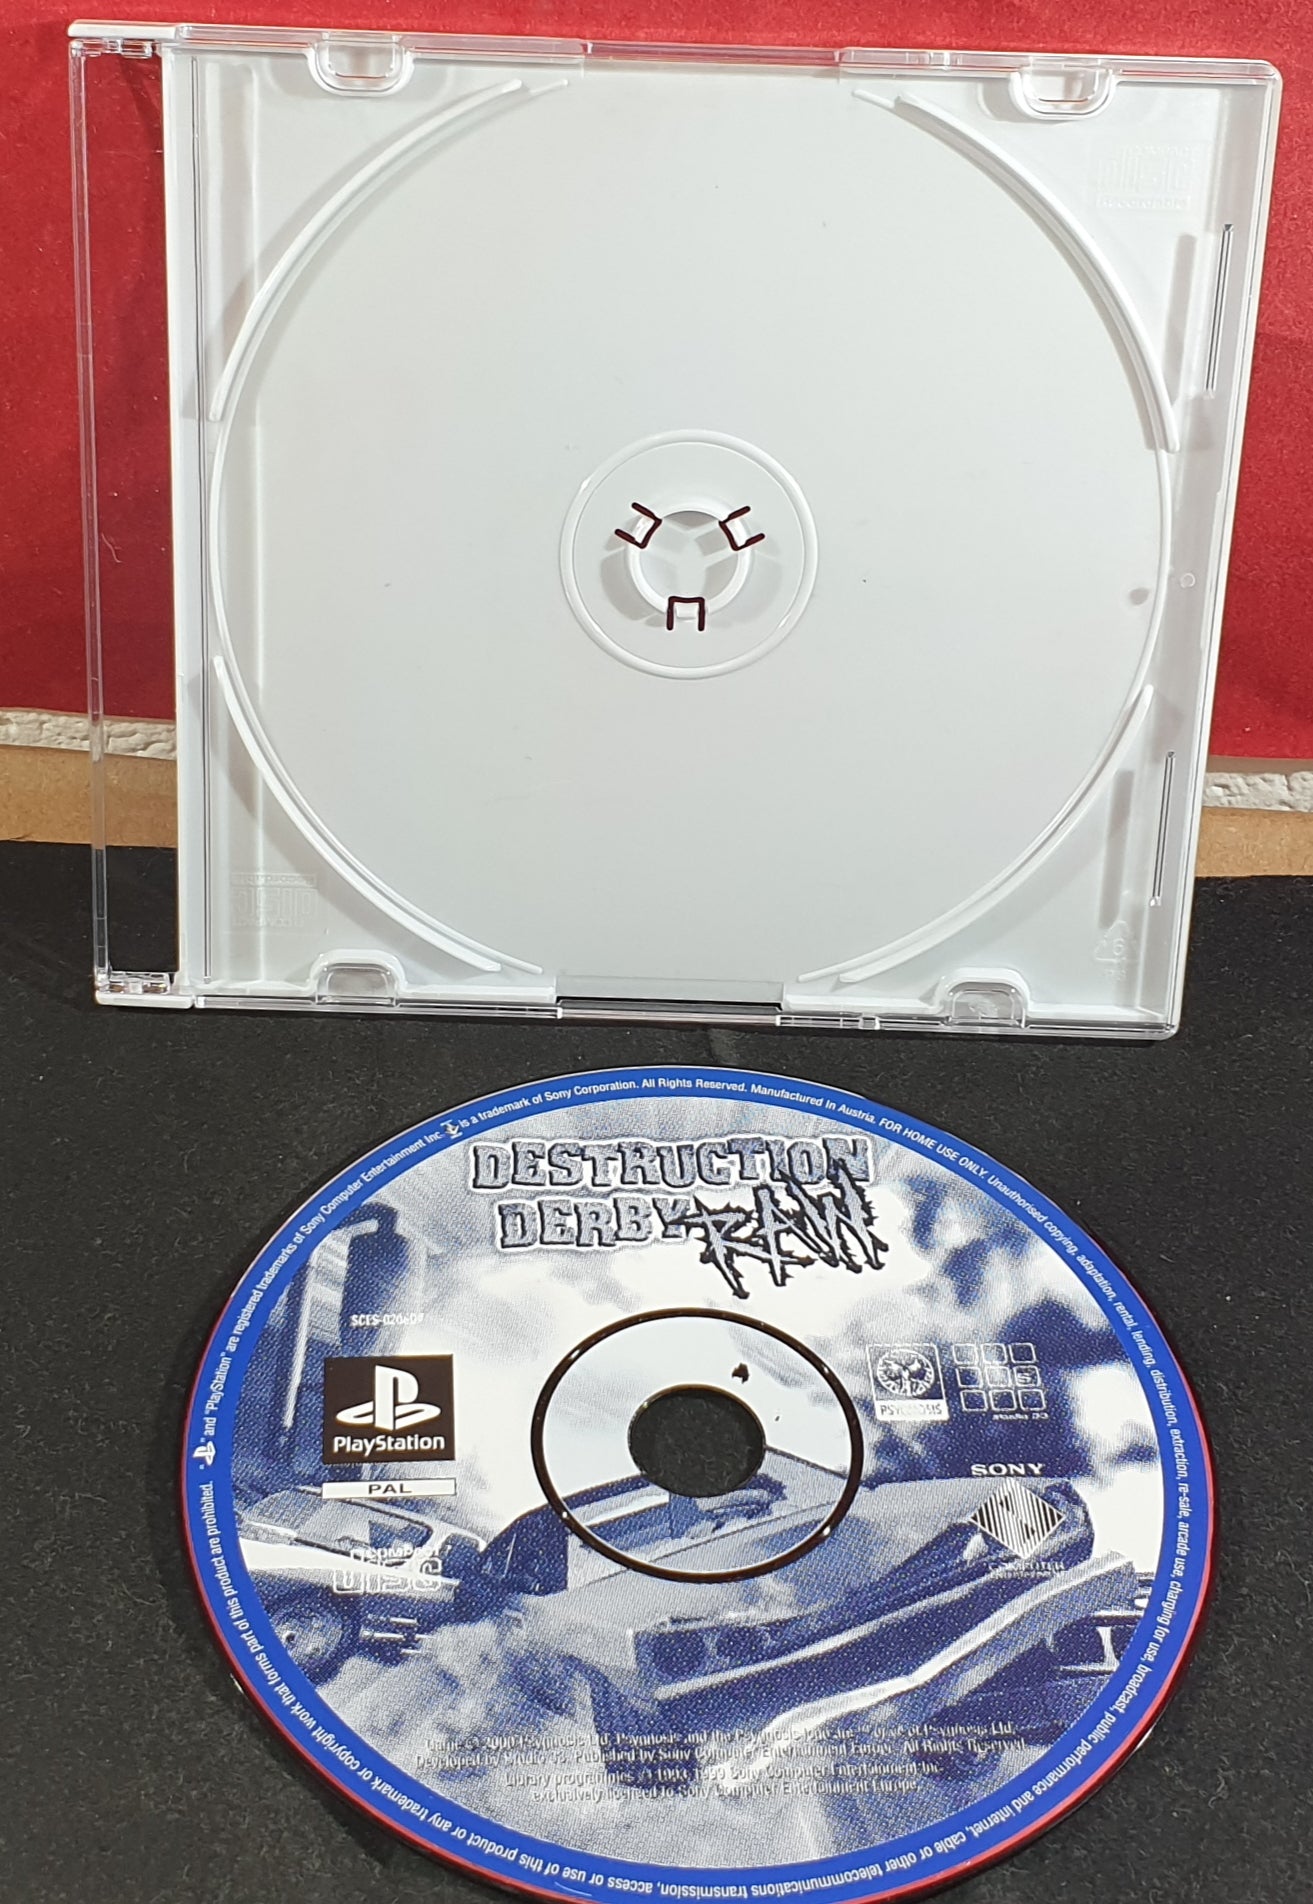 Destruction Derby Raw Sony Playstation 1 (PS1) Game Disc Only